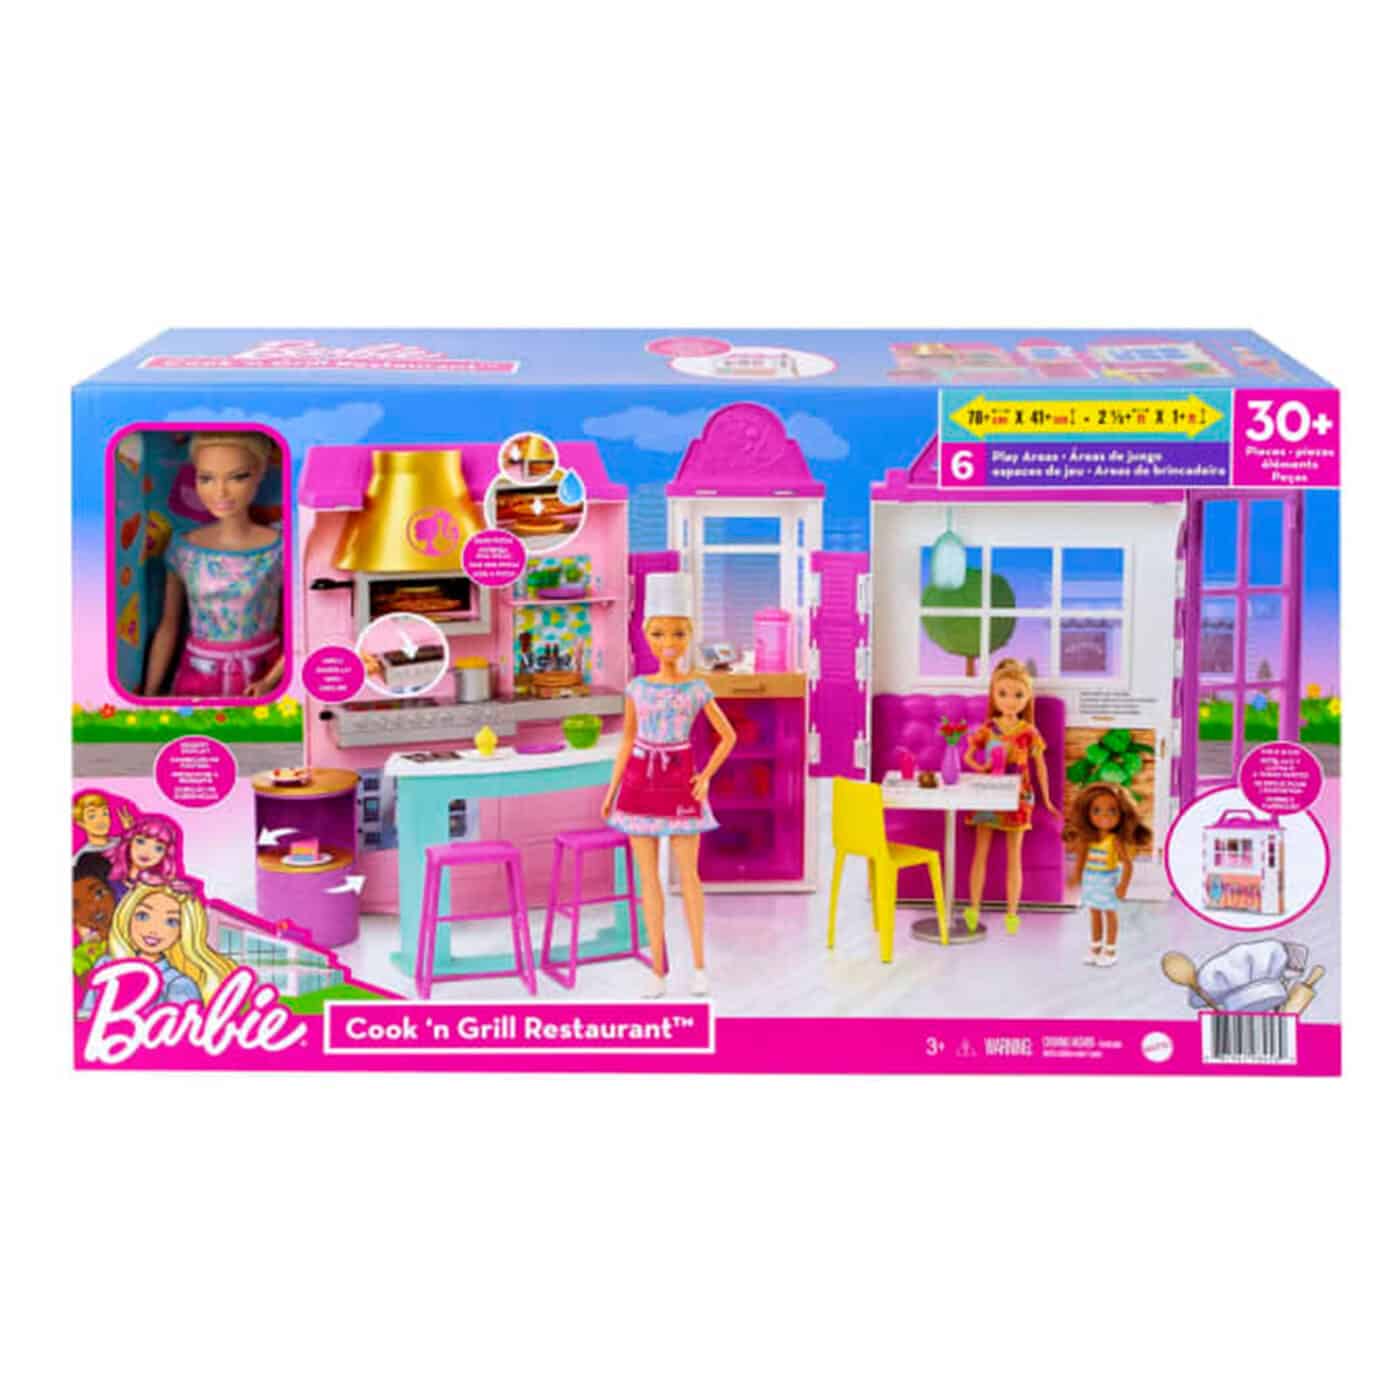 Barbie - Cook 'n Grill Restaurant Doll And Playset